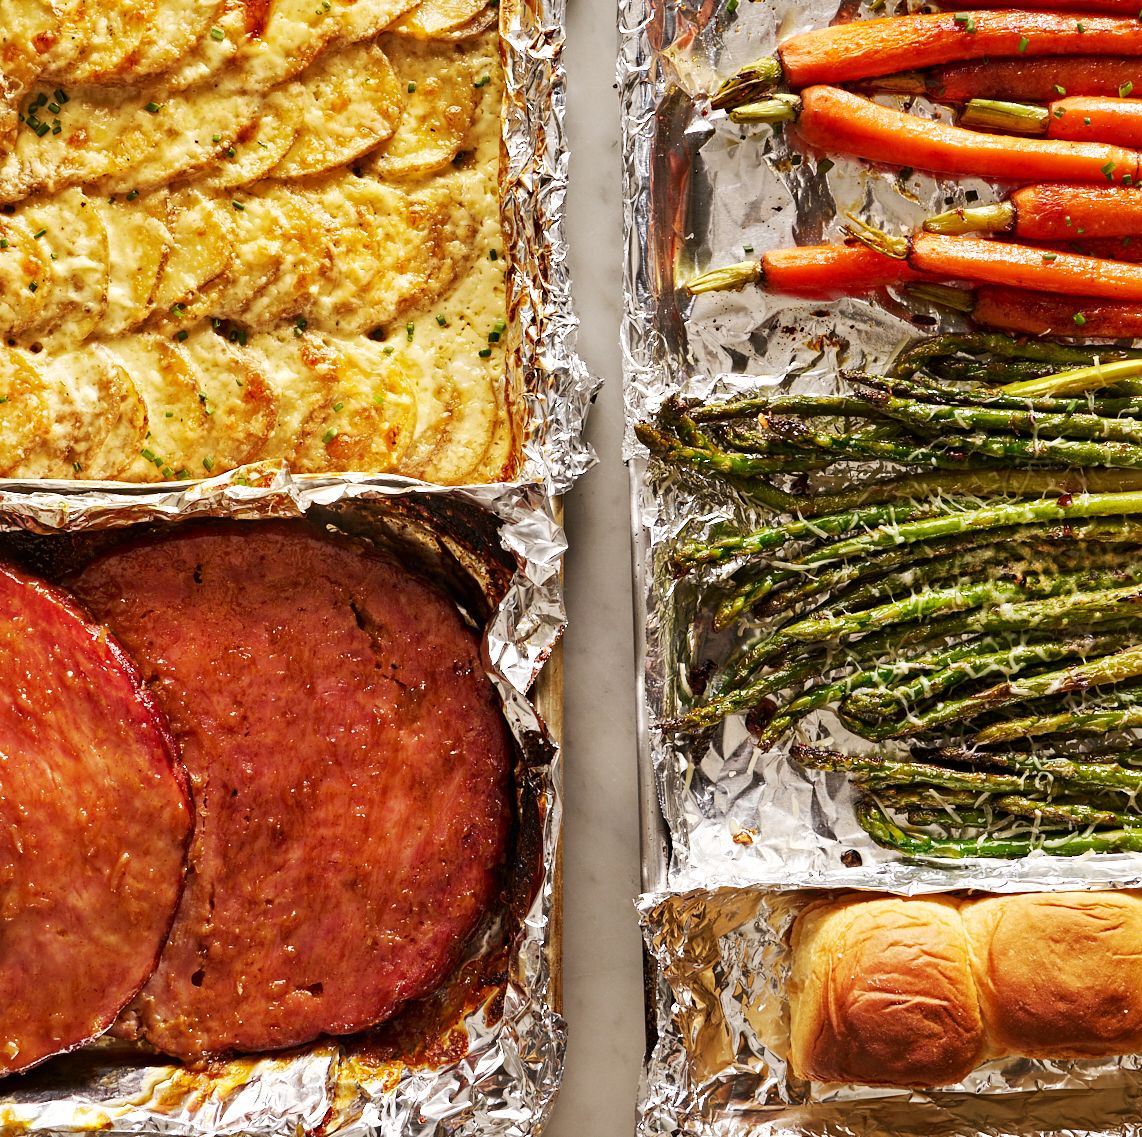 sheet pan easter dinner with glazed ham, gruyere scalloped potatoes, roasted carrots, roasted asparagus, and rolls